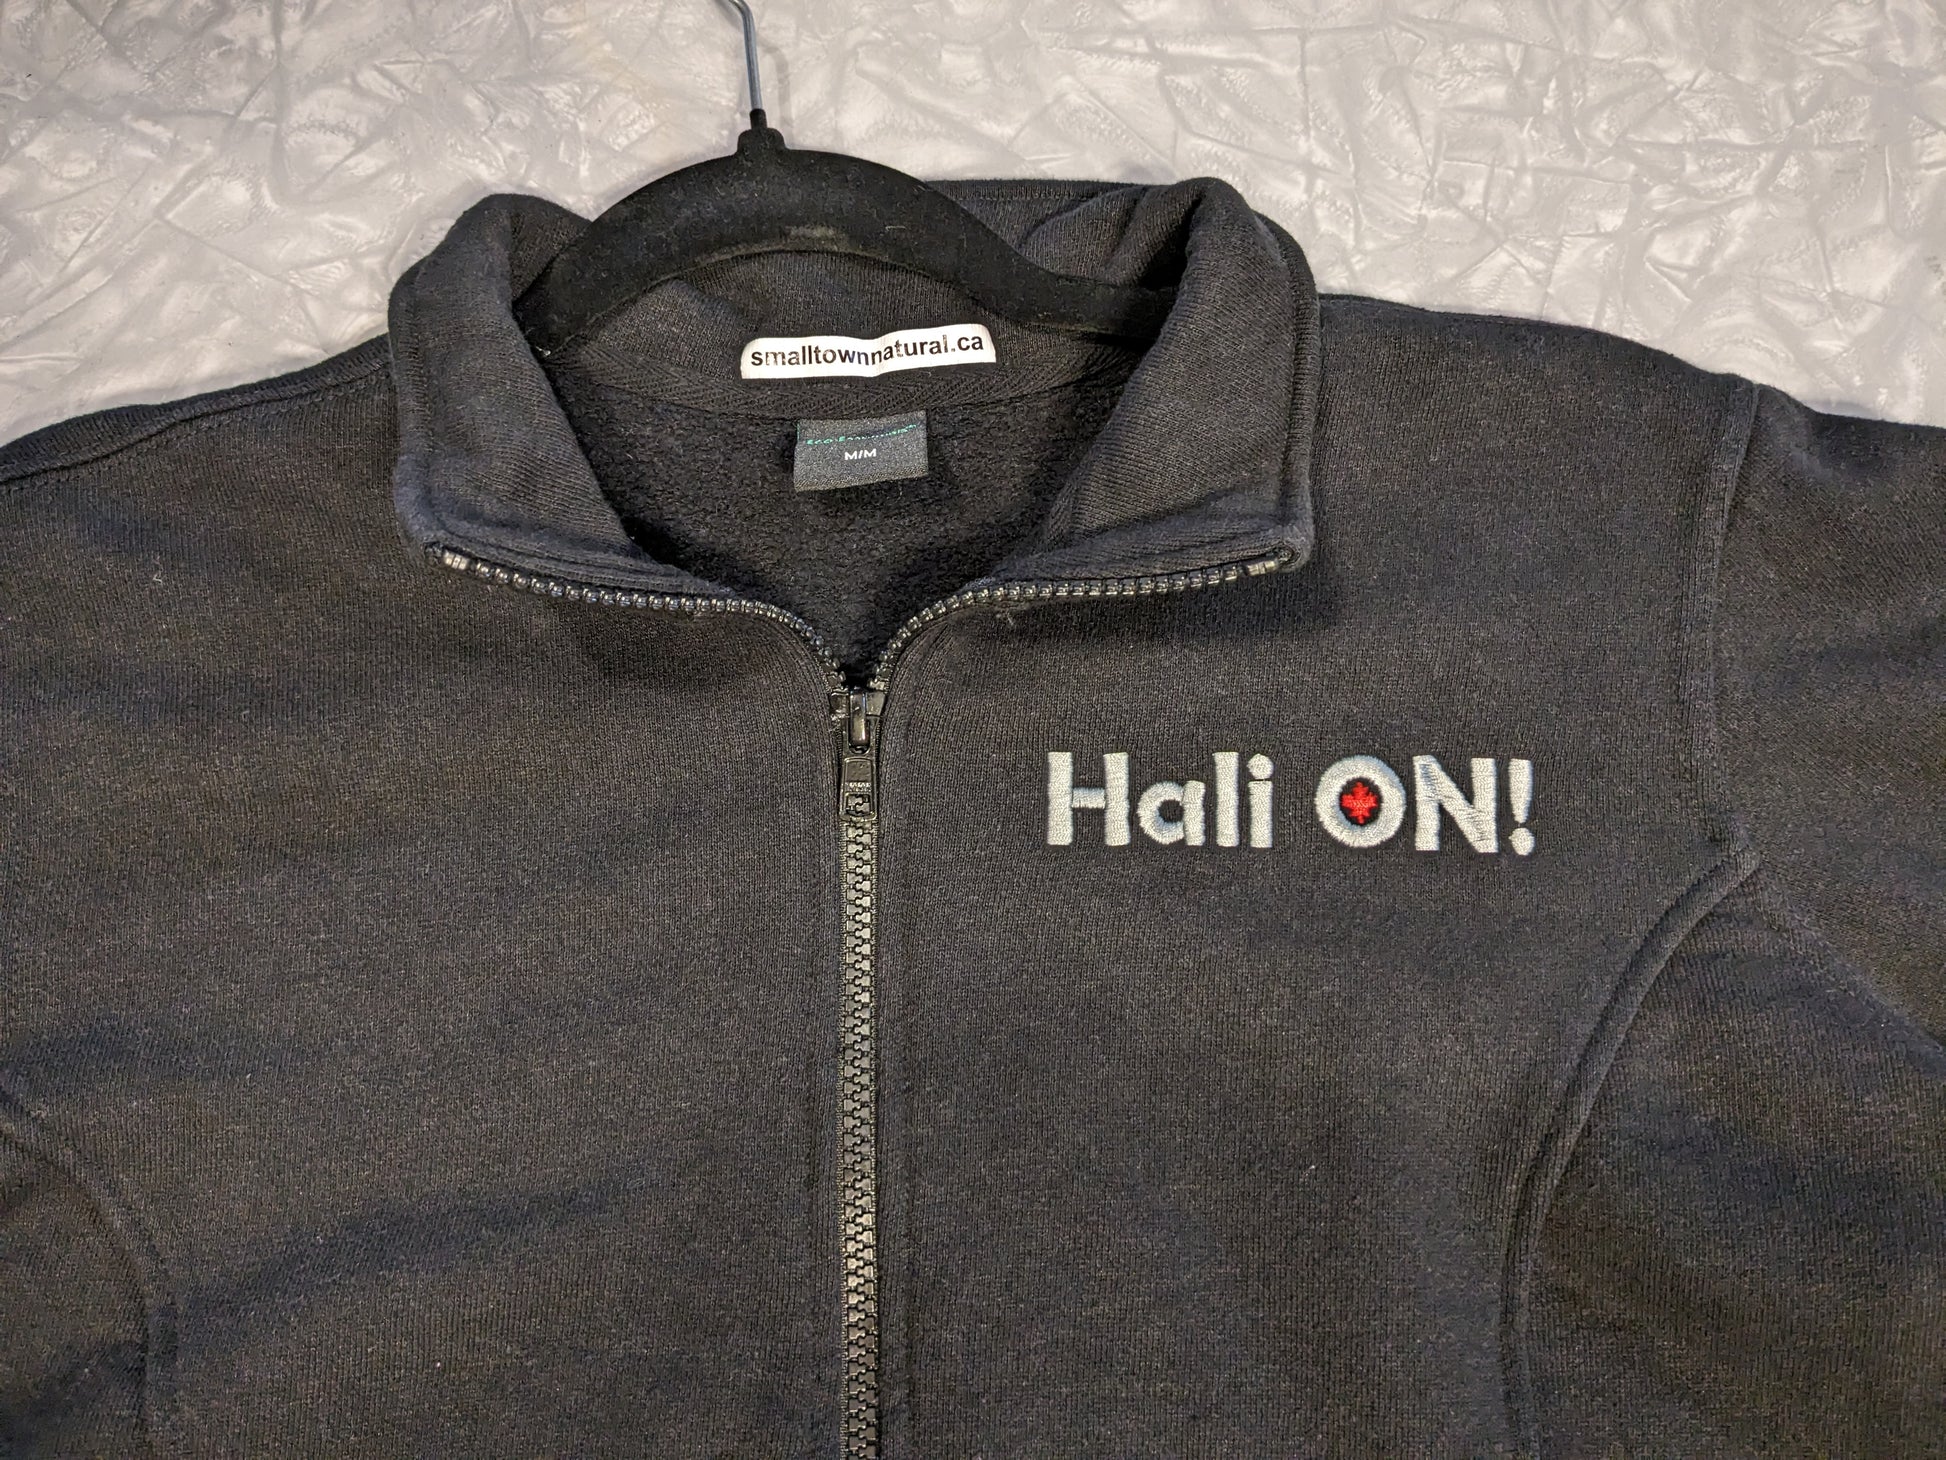 Small Town Natural original design of HALI ON! Hemp Fleece Track Jacket- Men's sizing, colour= black, (this is a close up of the HALI ON! embroidery in light grey with red maple leaf inside the 'O' )